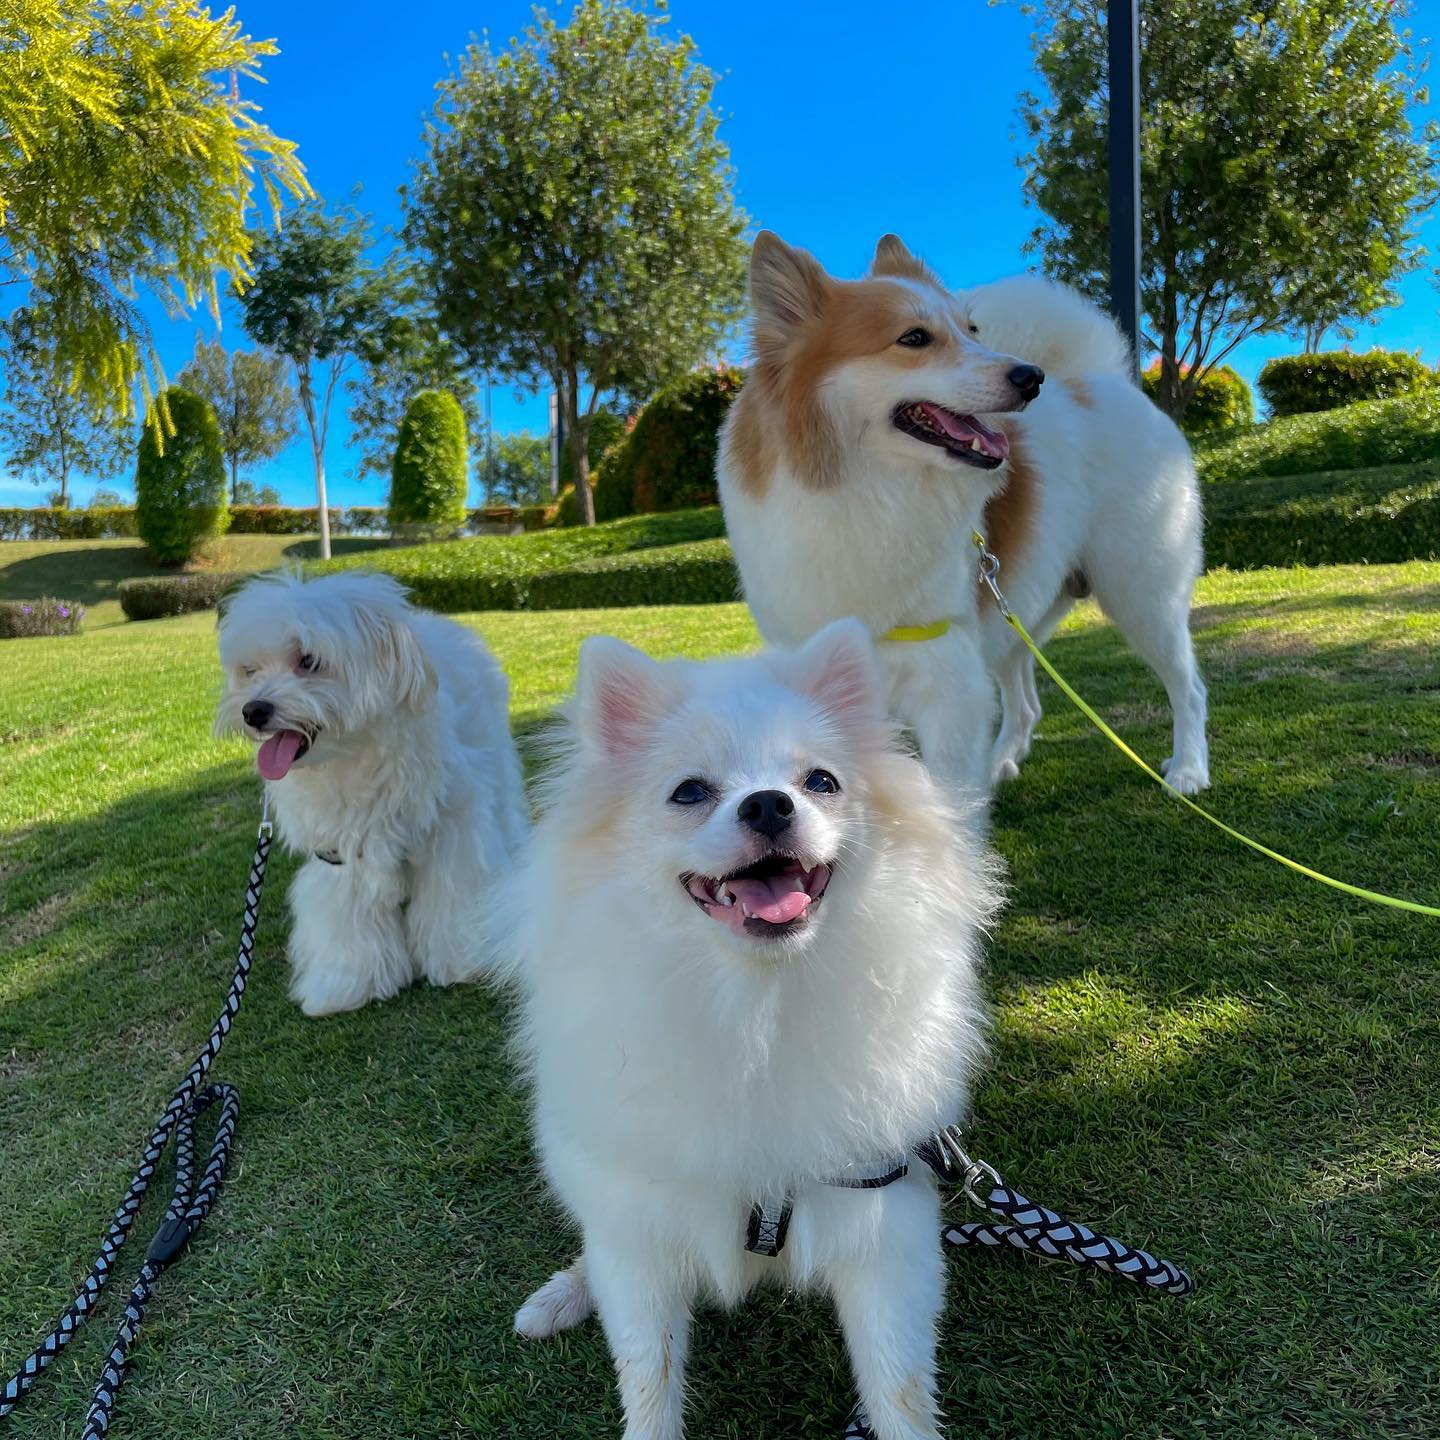 two fluffy small white dog and one brown and white dog leashed and standing together